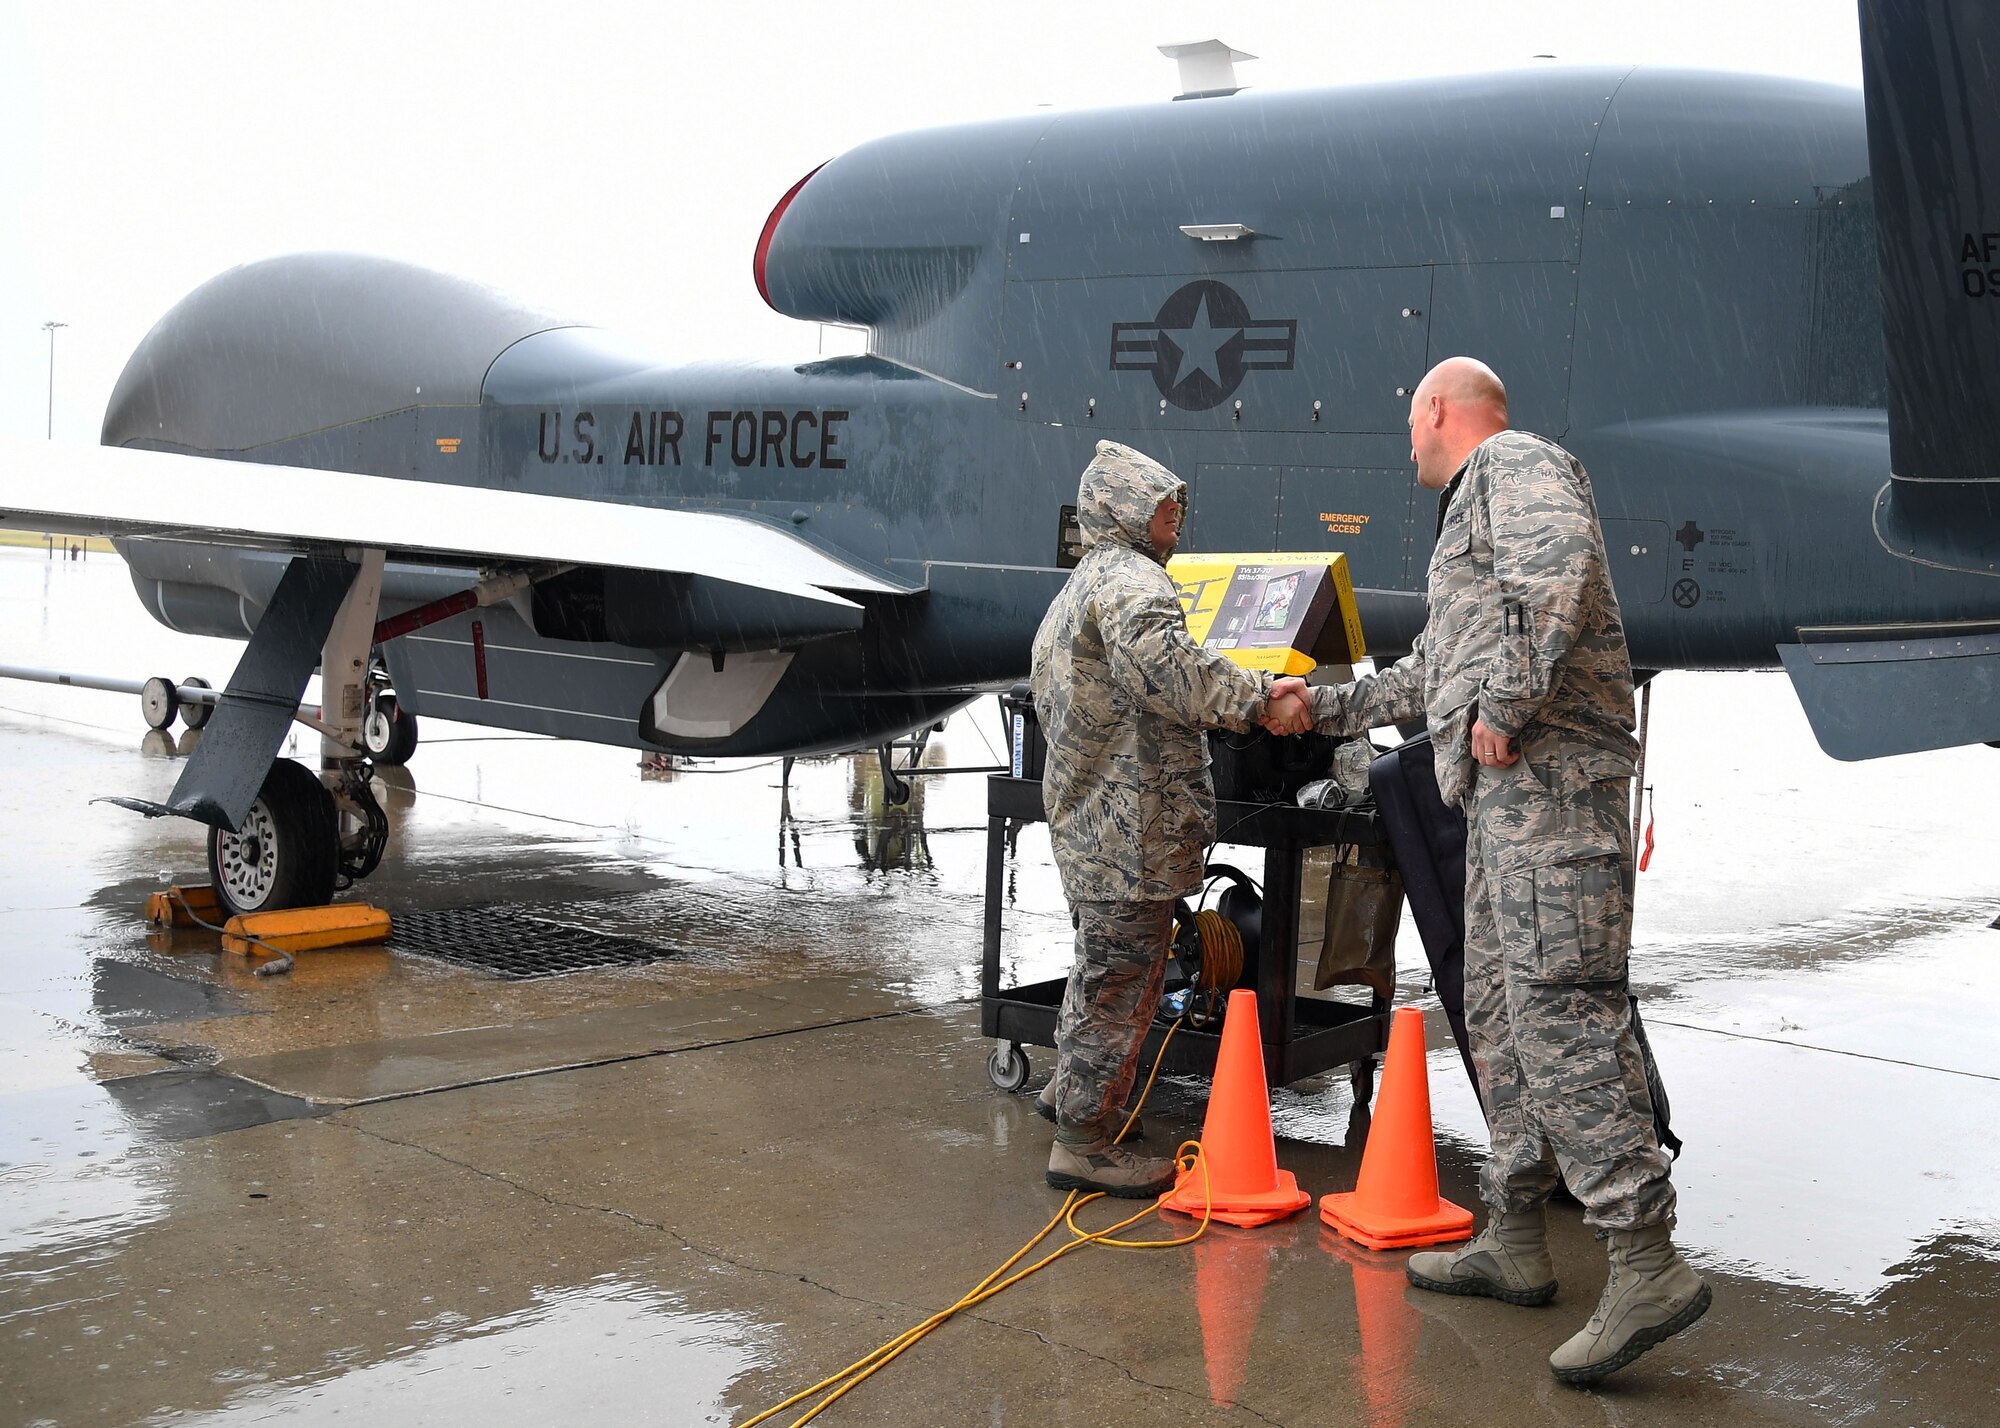 Brig. Gen. Christopher Ireland, deputy commander of Canadian North American Aerospace Defense Region, and Deputy Combined/Joint Force Air Component Commander for 1 Canadian Air Division, Winnipeg, Manitoba, Canada, thanks an Airman with the 69th Maintenance Squadron for working through the rain Sept. 15, 2017, on Grand Forks AFB, N.D. Ireland spent the day learning about how “Warriors of the North” execute the mission. (U.S. Air Force photo by Airman 1st Class Elora J. Martinez)